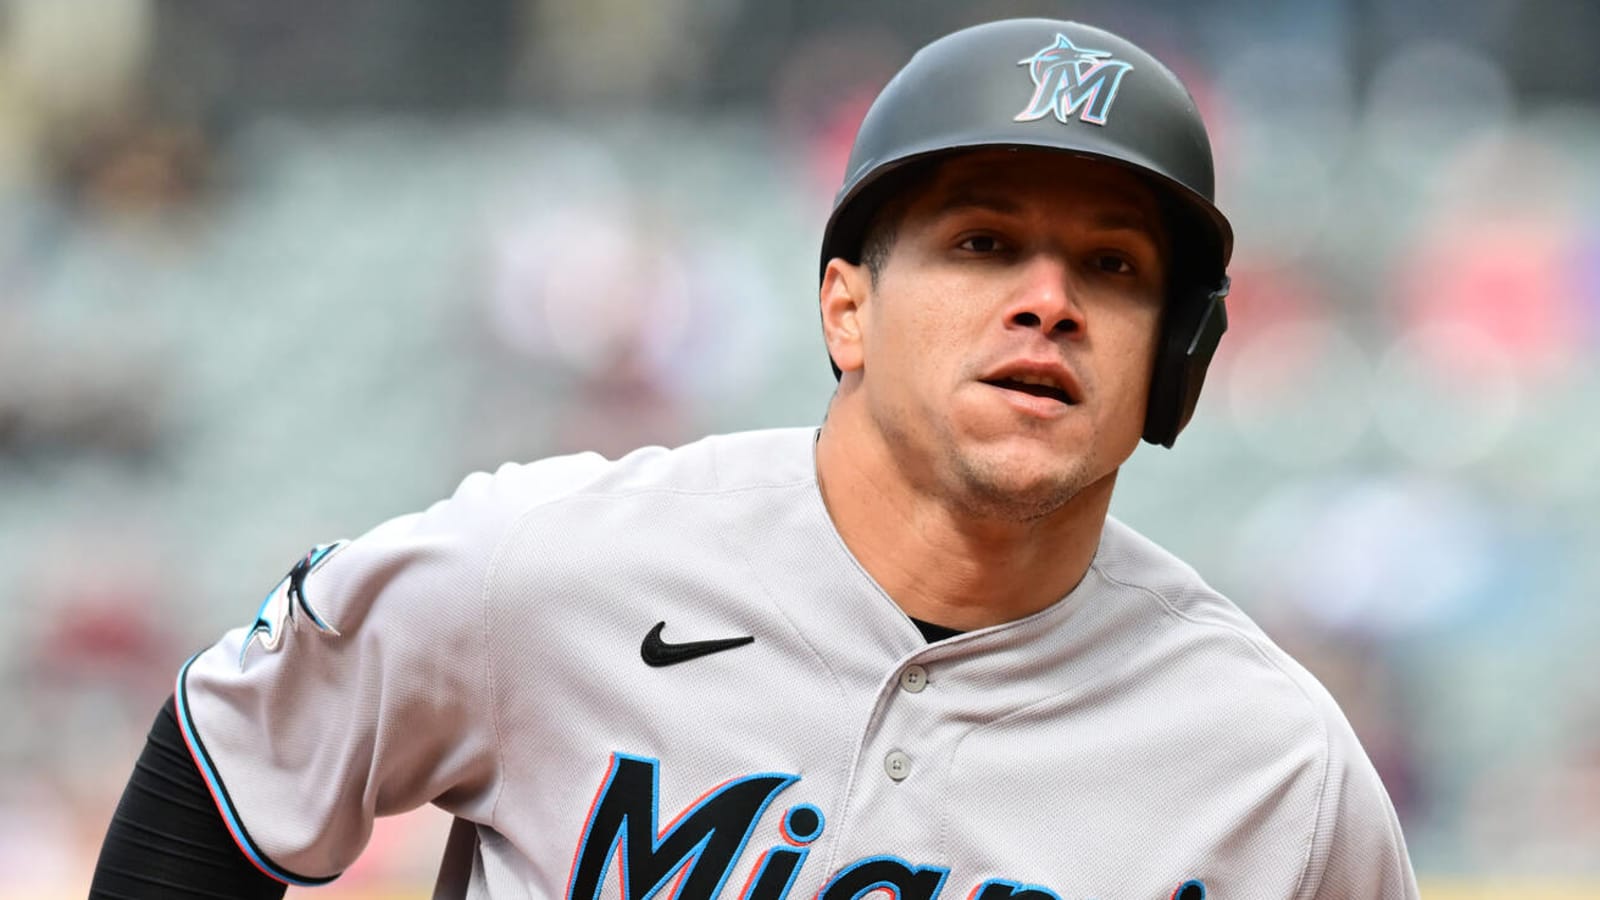 Marlins outfielder placed on IL with back injury